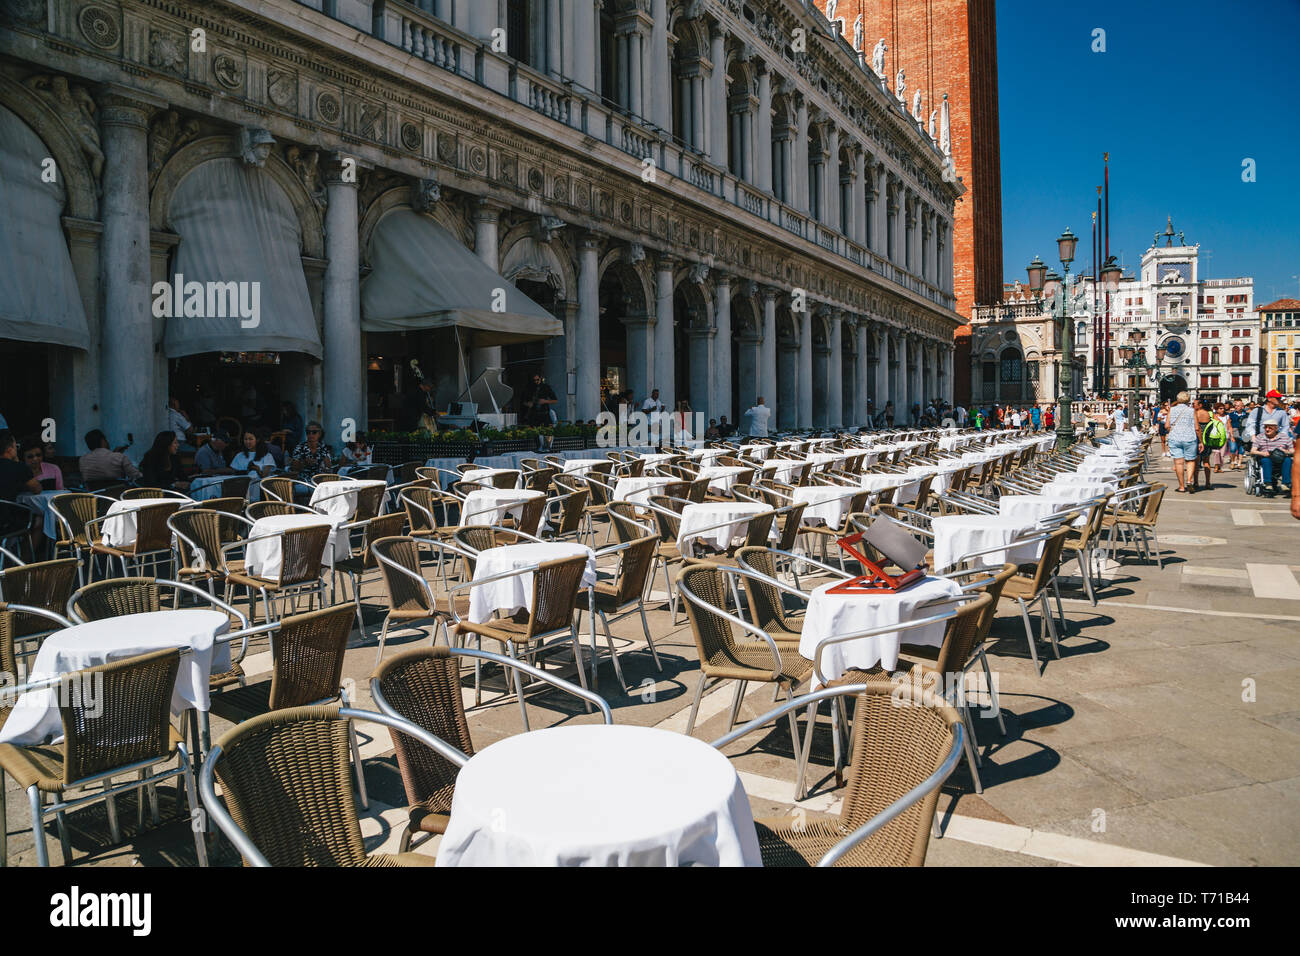 Venice, Italy - September, 9 2018: A Gran Caffe Chioggia outdoor seating open air restaurant at the street at at St. Mark's Square, Piazza San Marco. Stock Photo